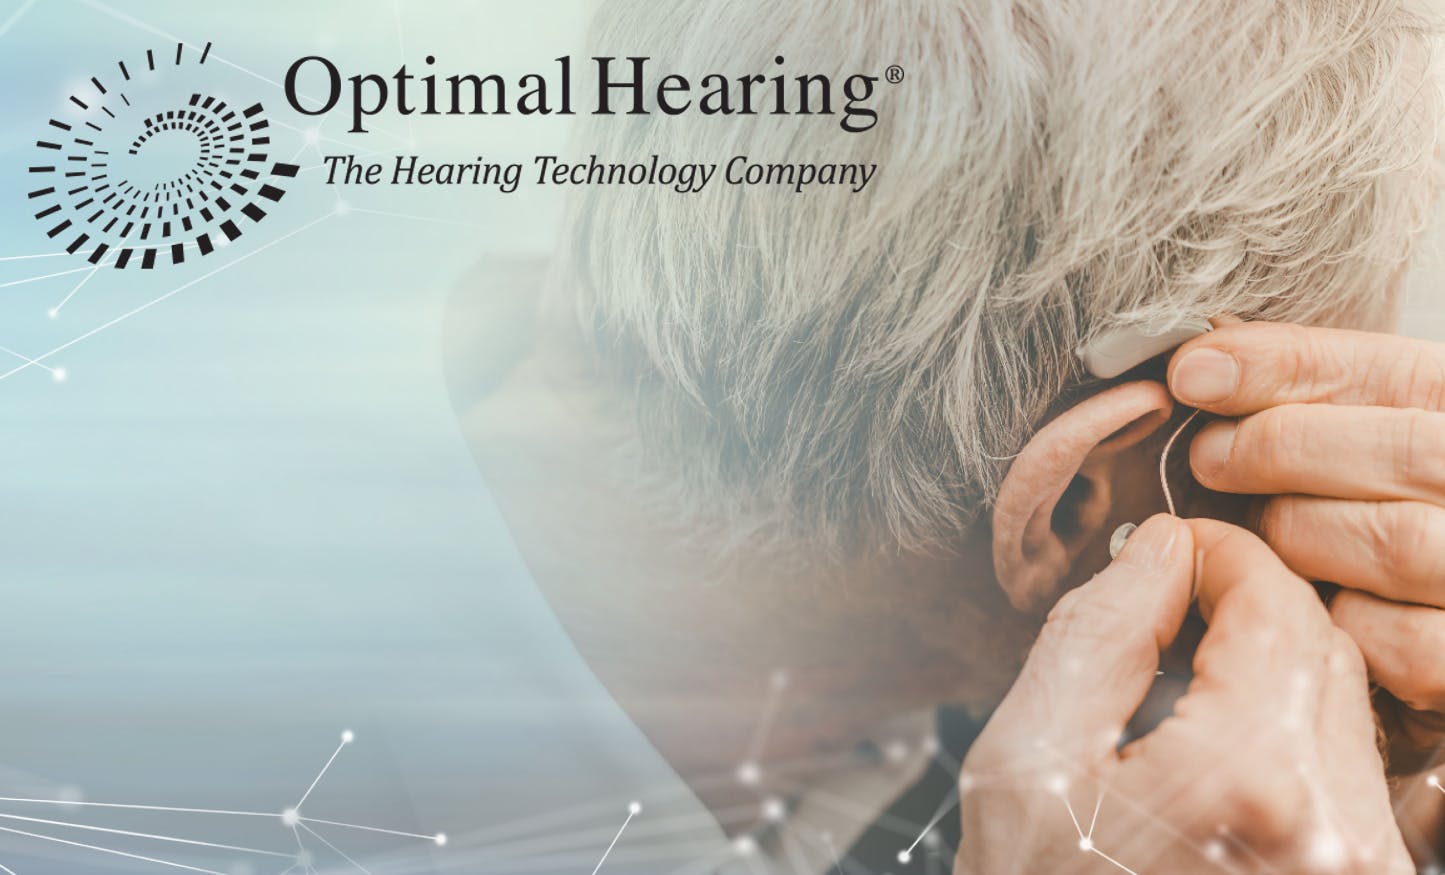 Optimal Hearing Systems: Your Optimal Hearing Aids!